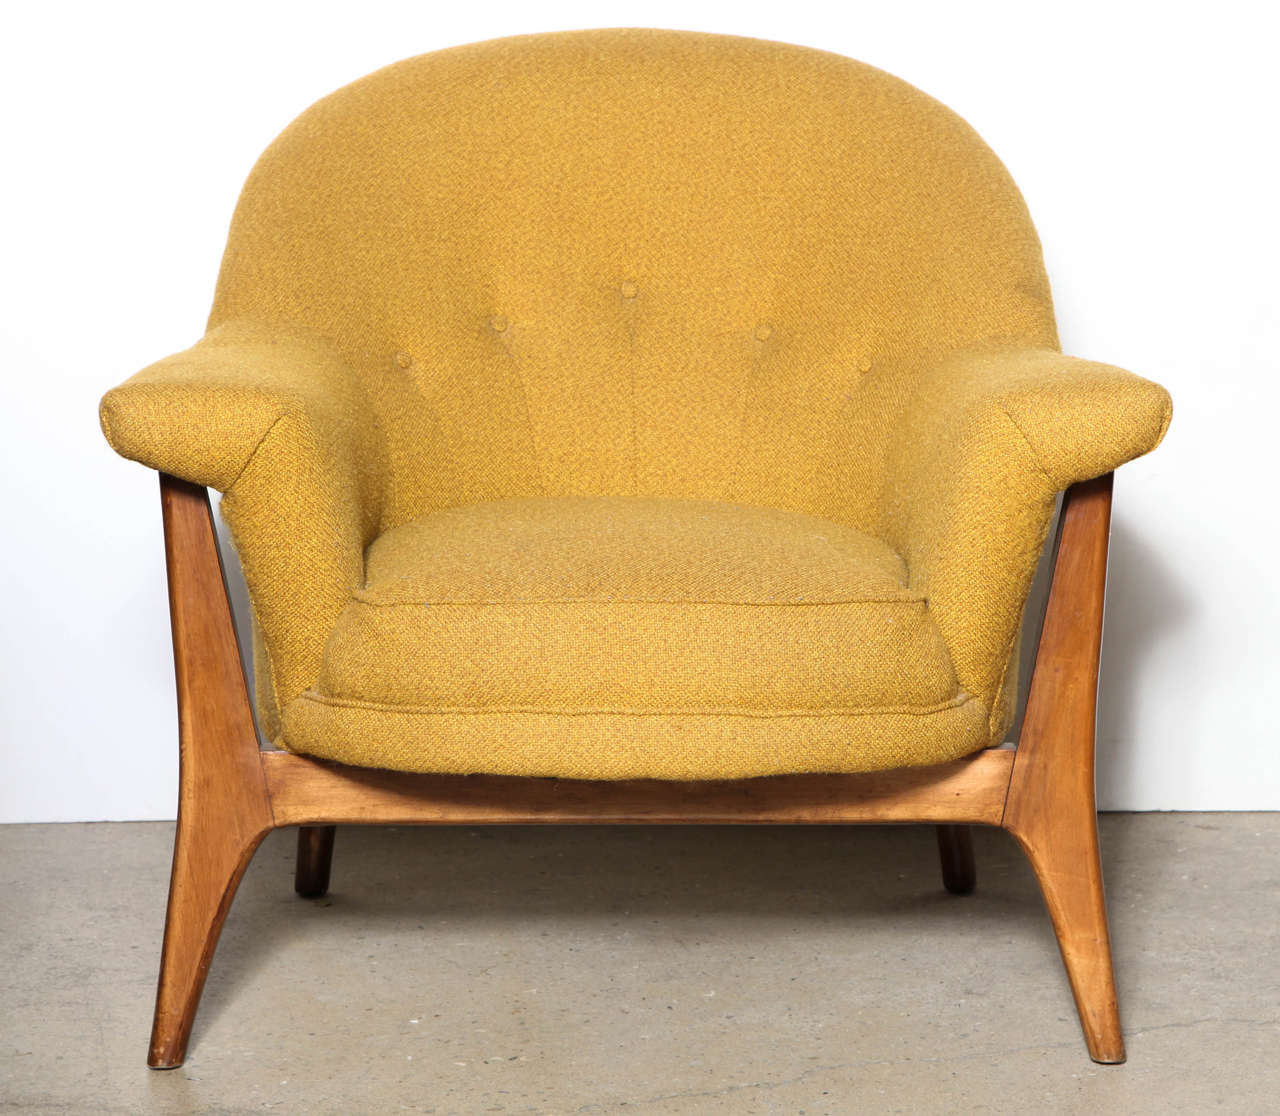 Wide and comfortable Organic Modern Adrian Pearsall for Craft Associates  tufted Club Chair on a sturdy Walnut frame with original Mustard fabric.  
Ready for reupholstery